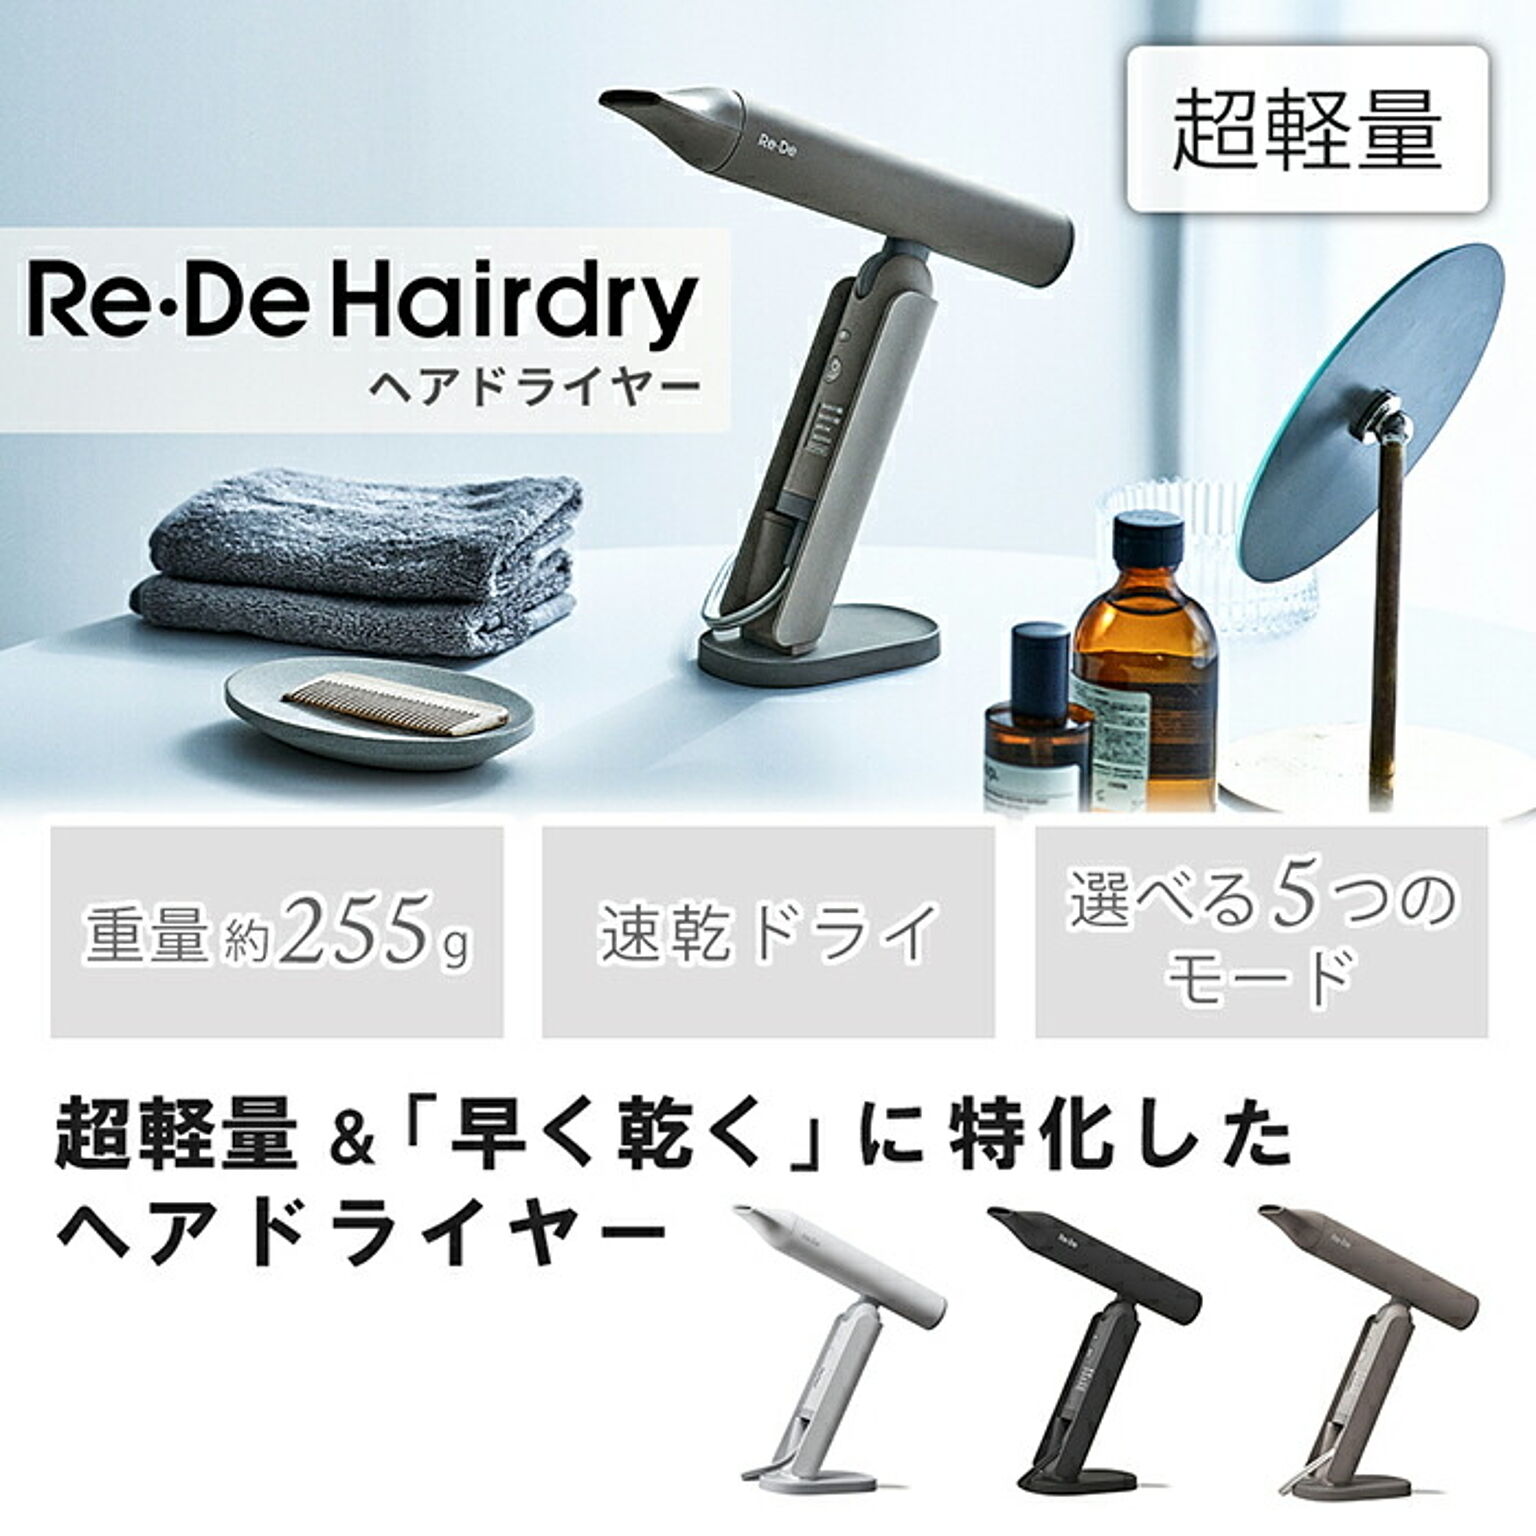 A-Stage Re・De Hairdry ヘアドライヤー マイナスイオン ヒュッゲ